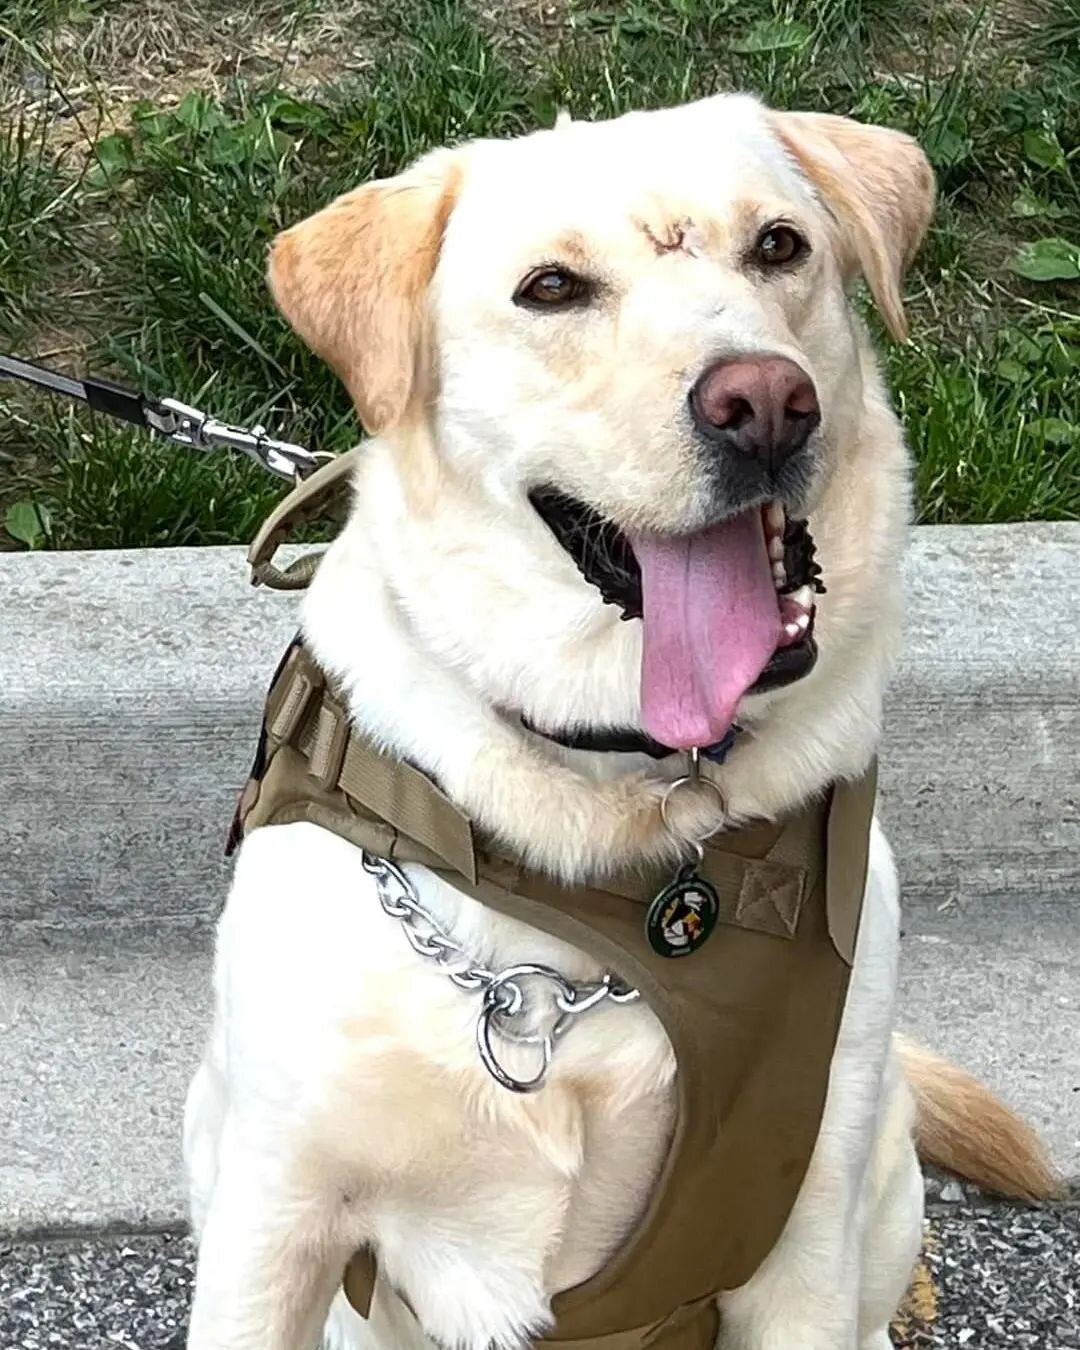 @lostmountaingroup wants to wish everyone a Happy Fri-REY!  Hope that you are able to get out in the sunshine and enjoy the weekend! 

#ItsAllAboutThePuppies 

#MWD #K9Hero #K9 #RetiredMWD #RetiredK9 #HeroDog  #MWDofinstagram #DogsofInstagram #Retire